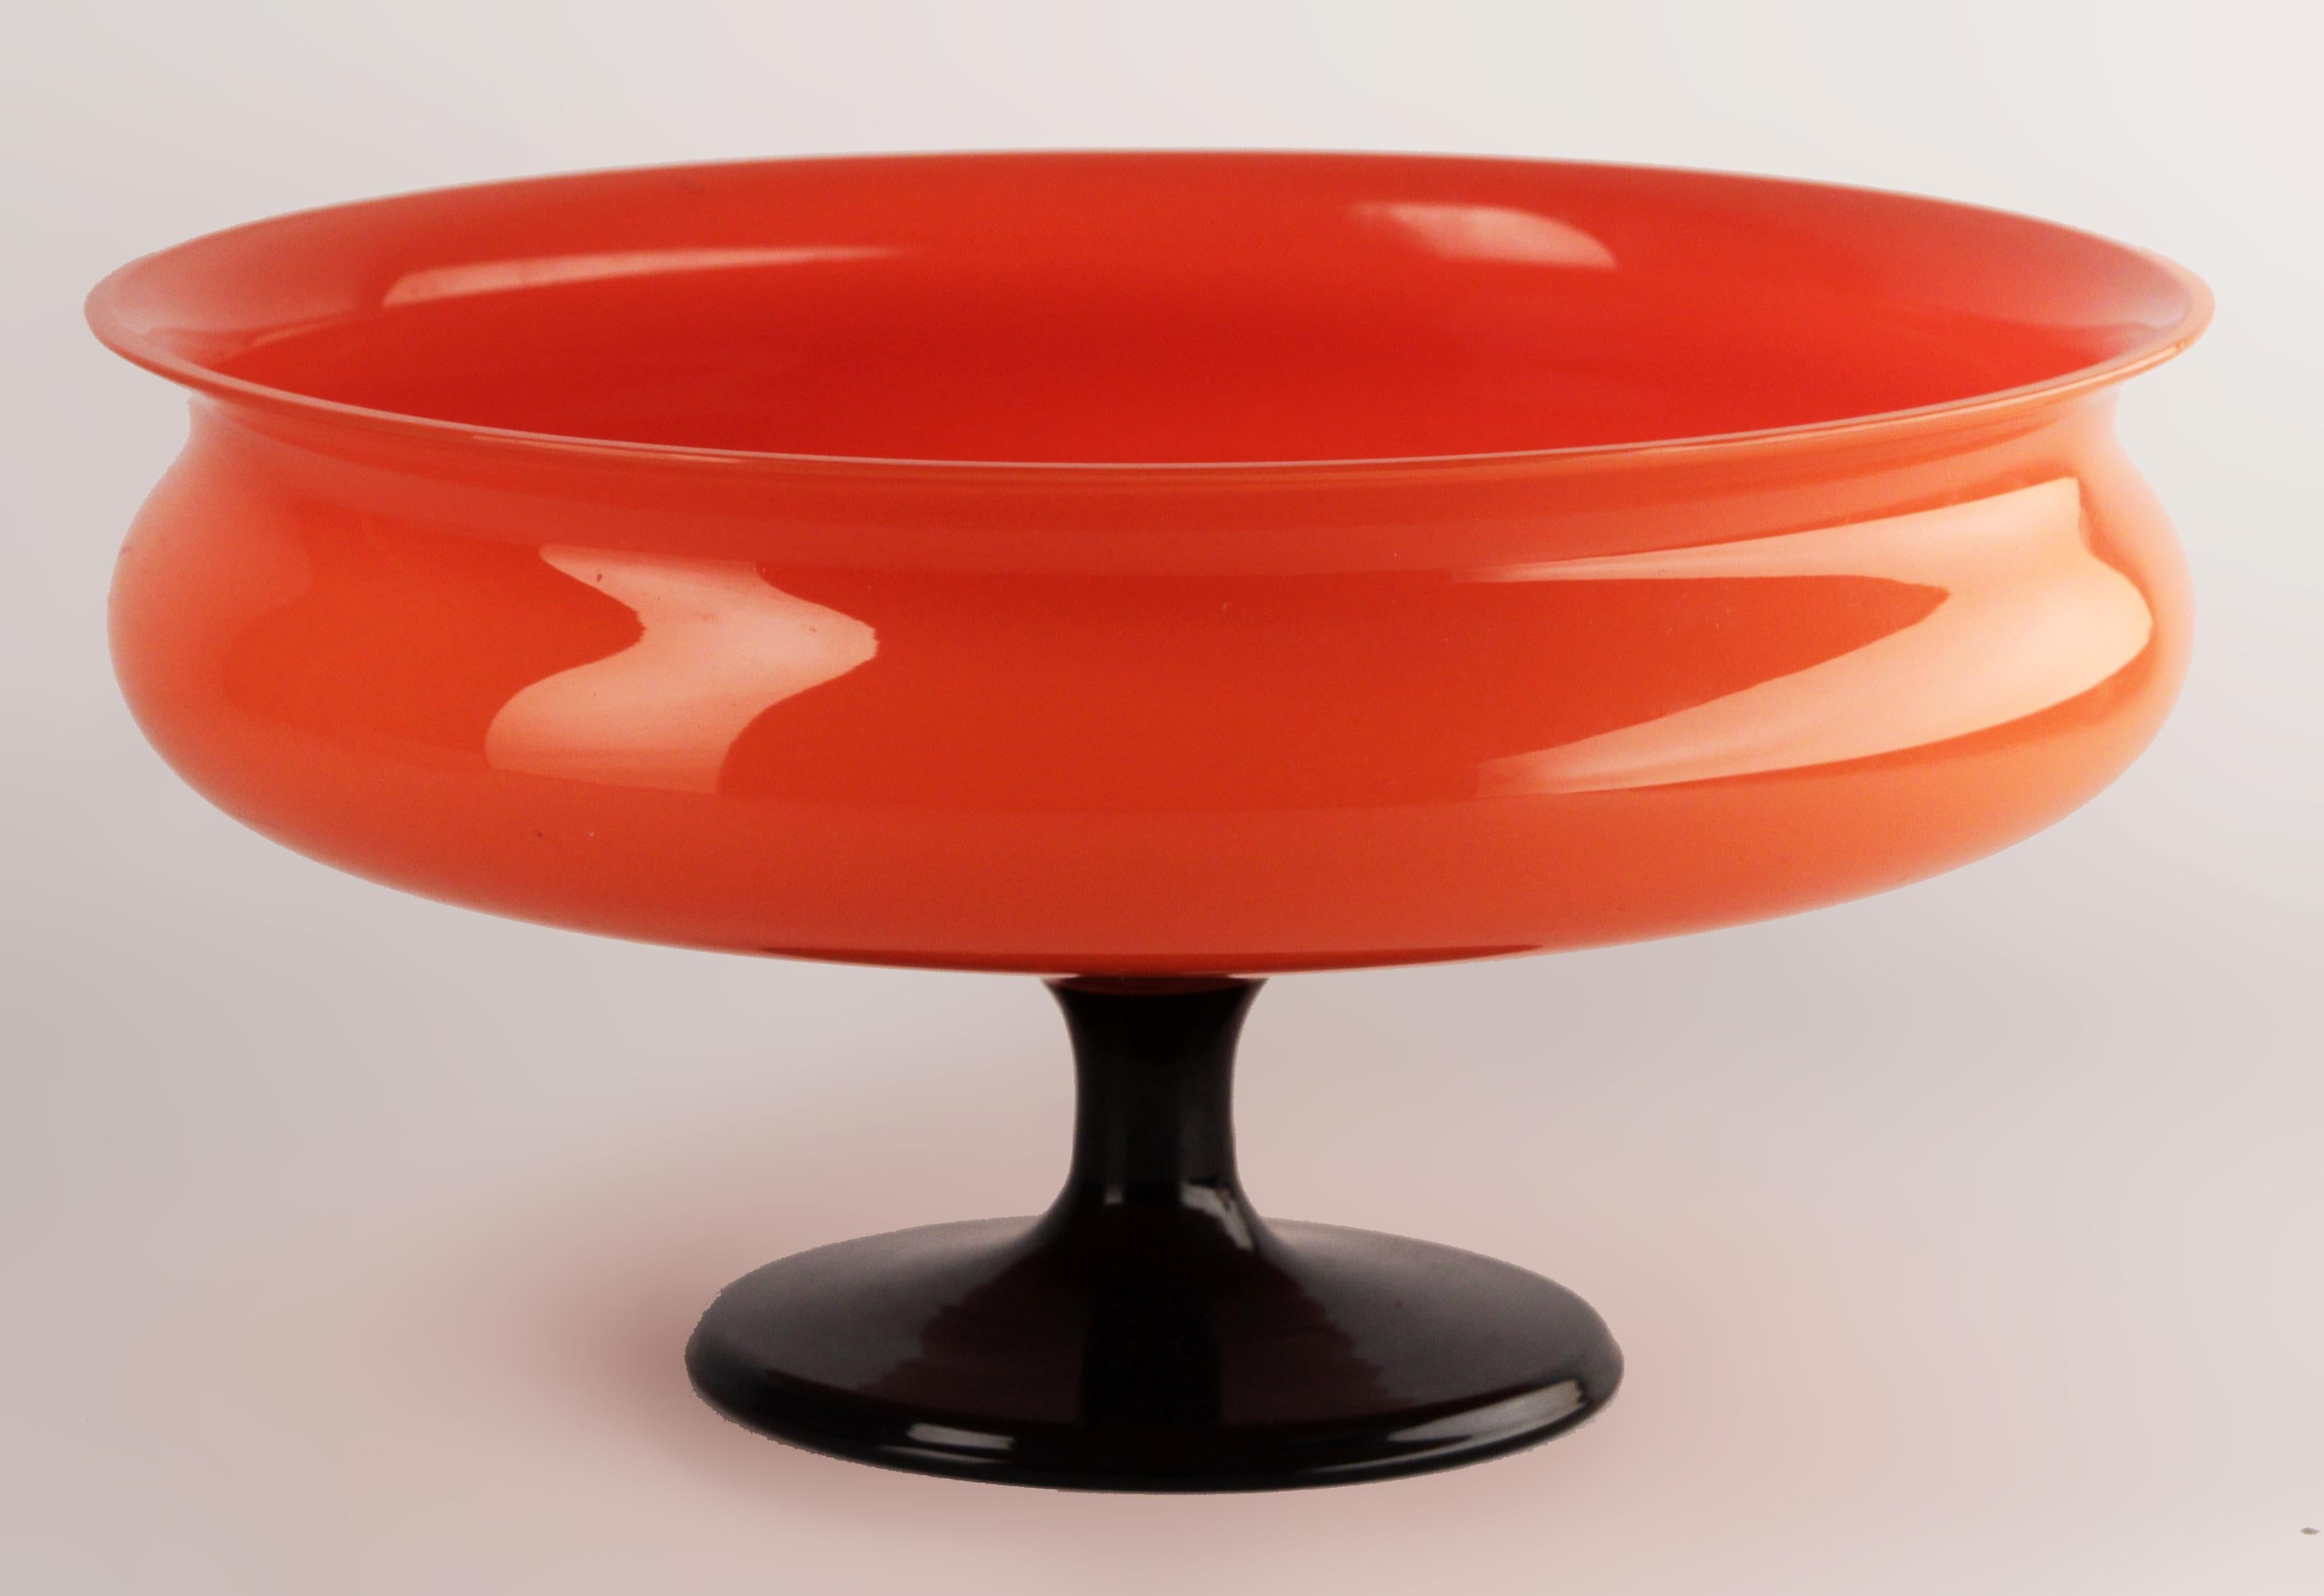 Early 20th century czech cased glazed art glass tango Powolny-like red bowl with foot

By: Michael Powolny (in the style of)
Material: glass, art glass
Technique: cast, polished, glazed, molded
Dimensions: 10 in x 5 in
Date: early 20th